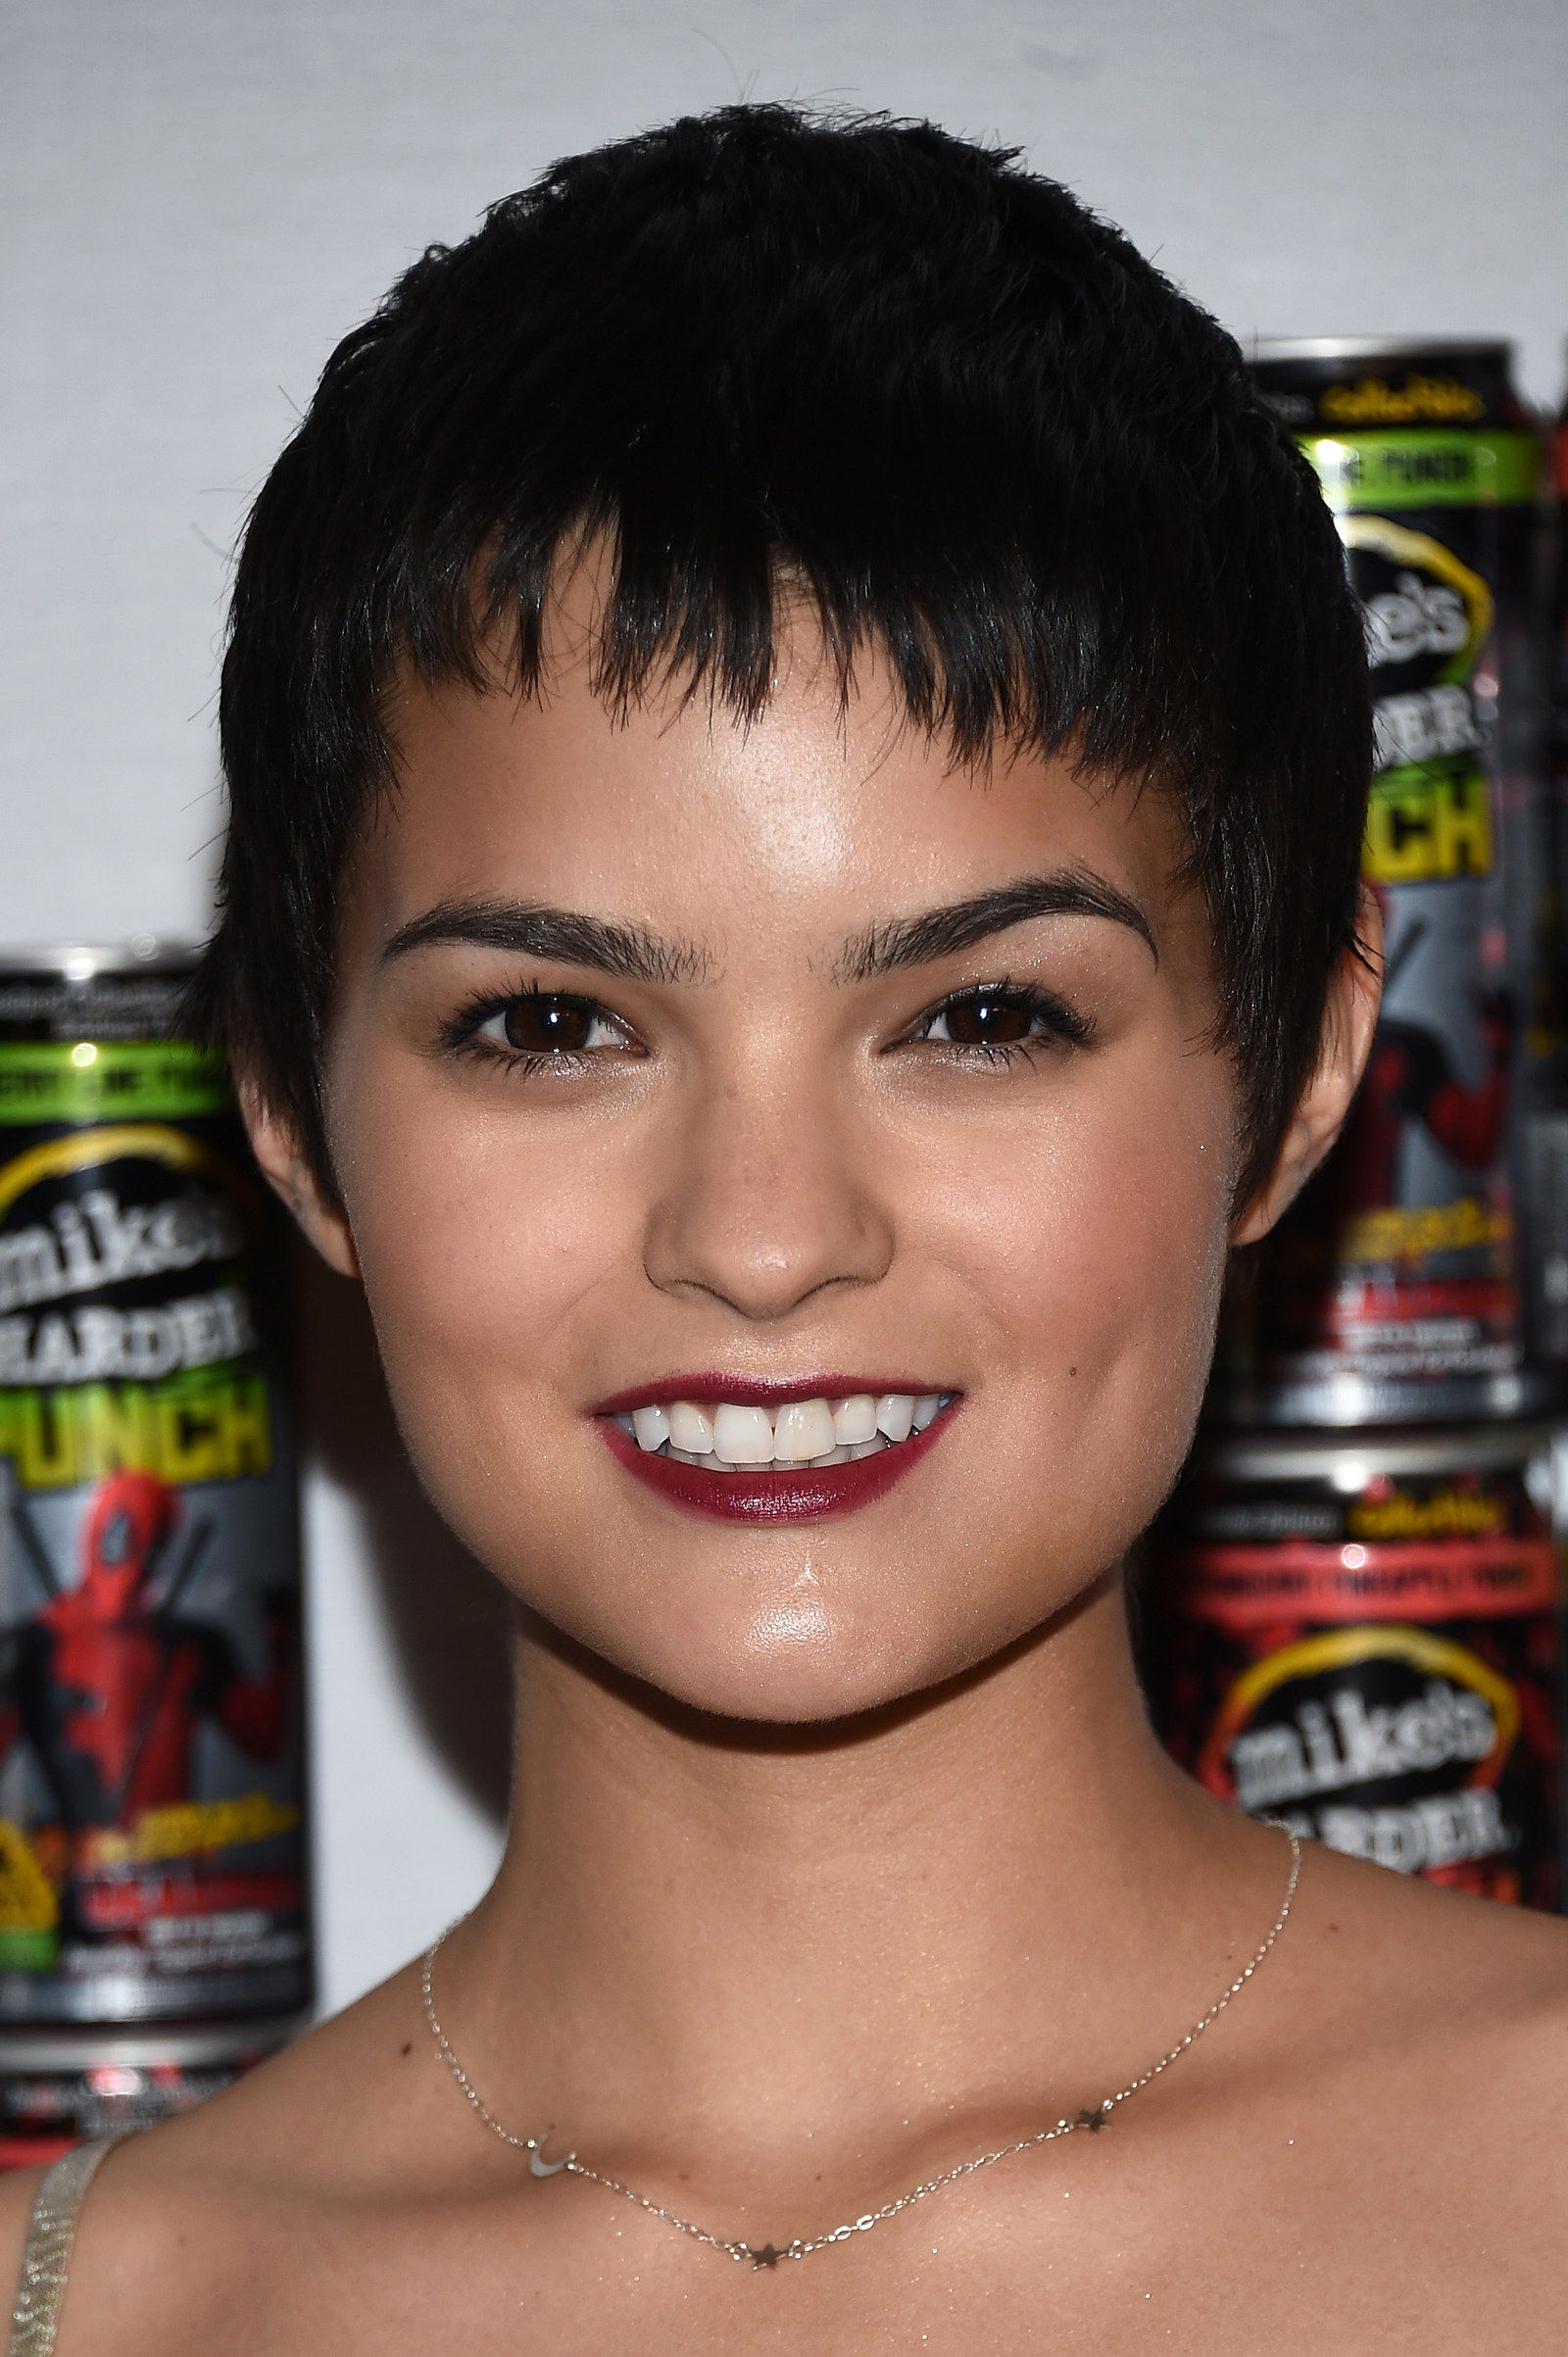 Actors are essentially meat puppets, brianna hildebrand was told by her dir...